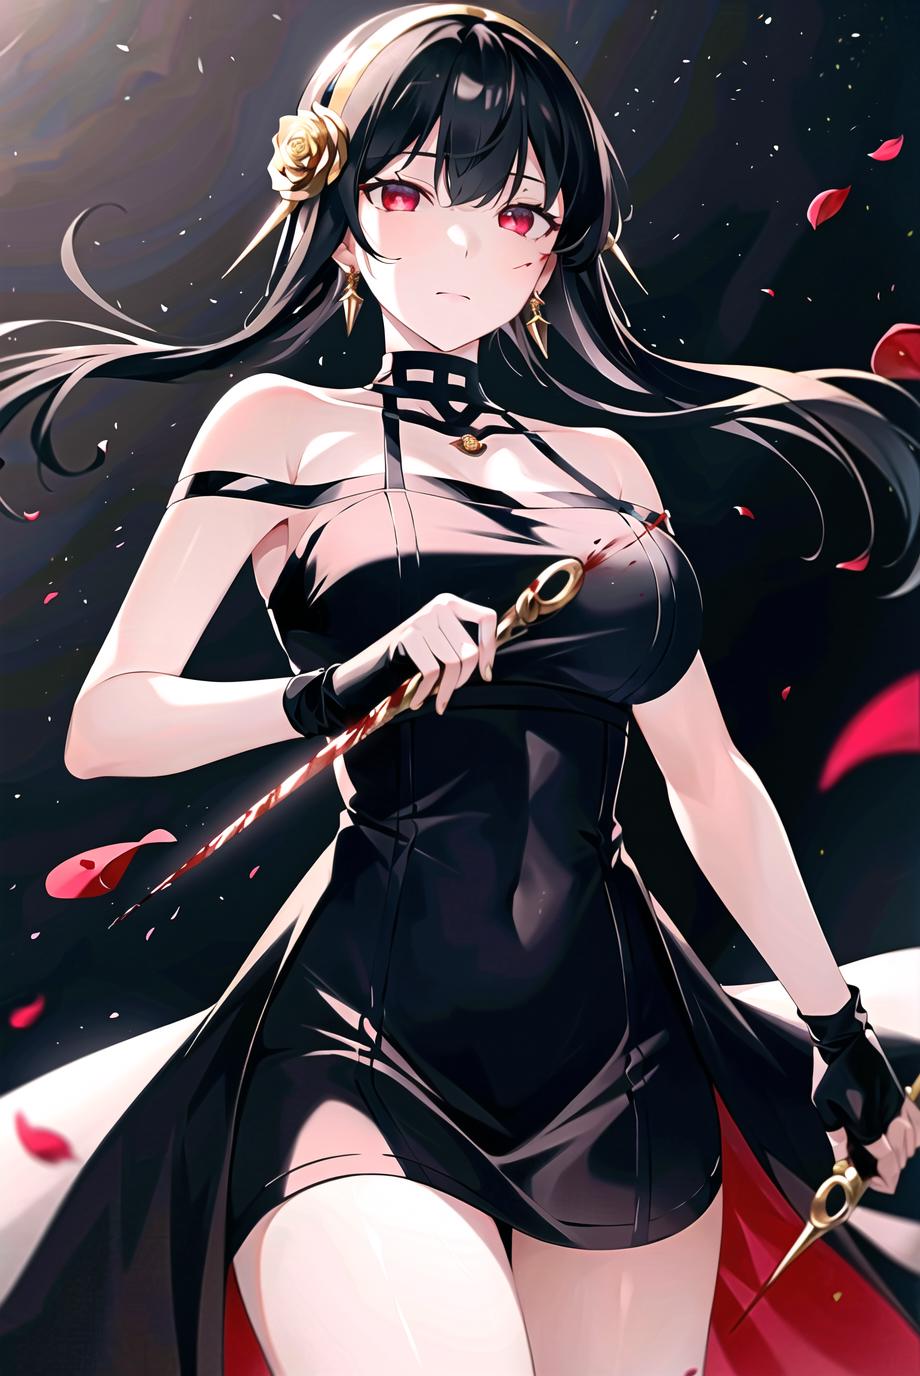 Anime character wearing a black dress and holding a wand.